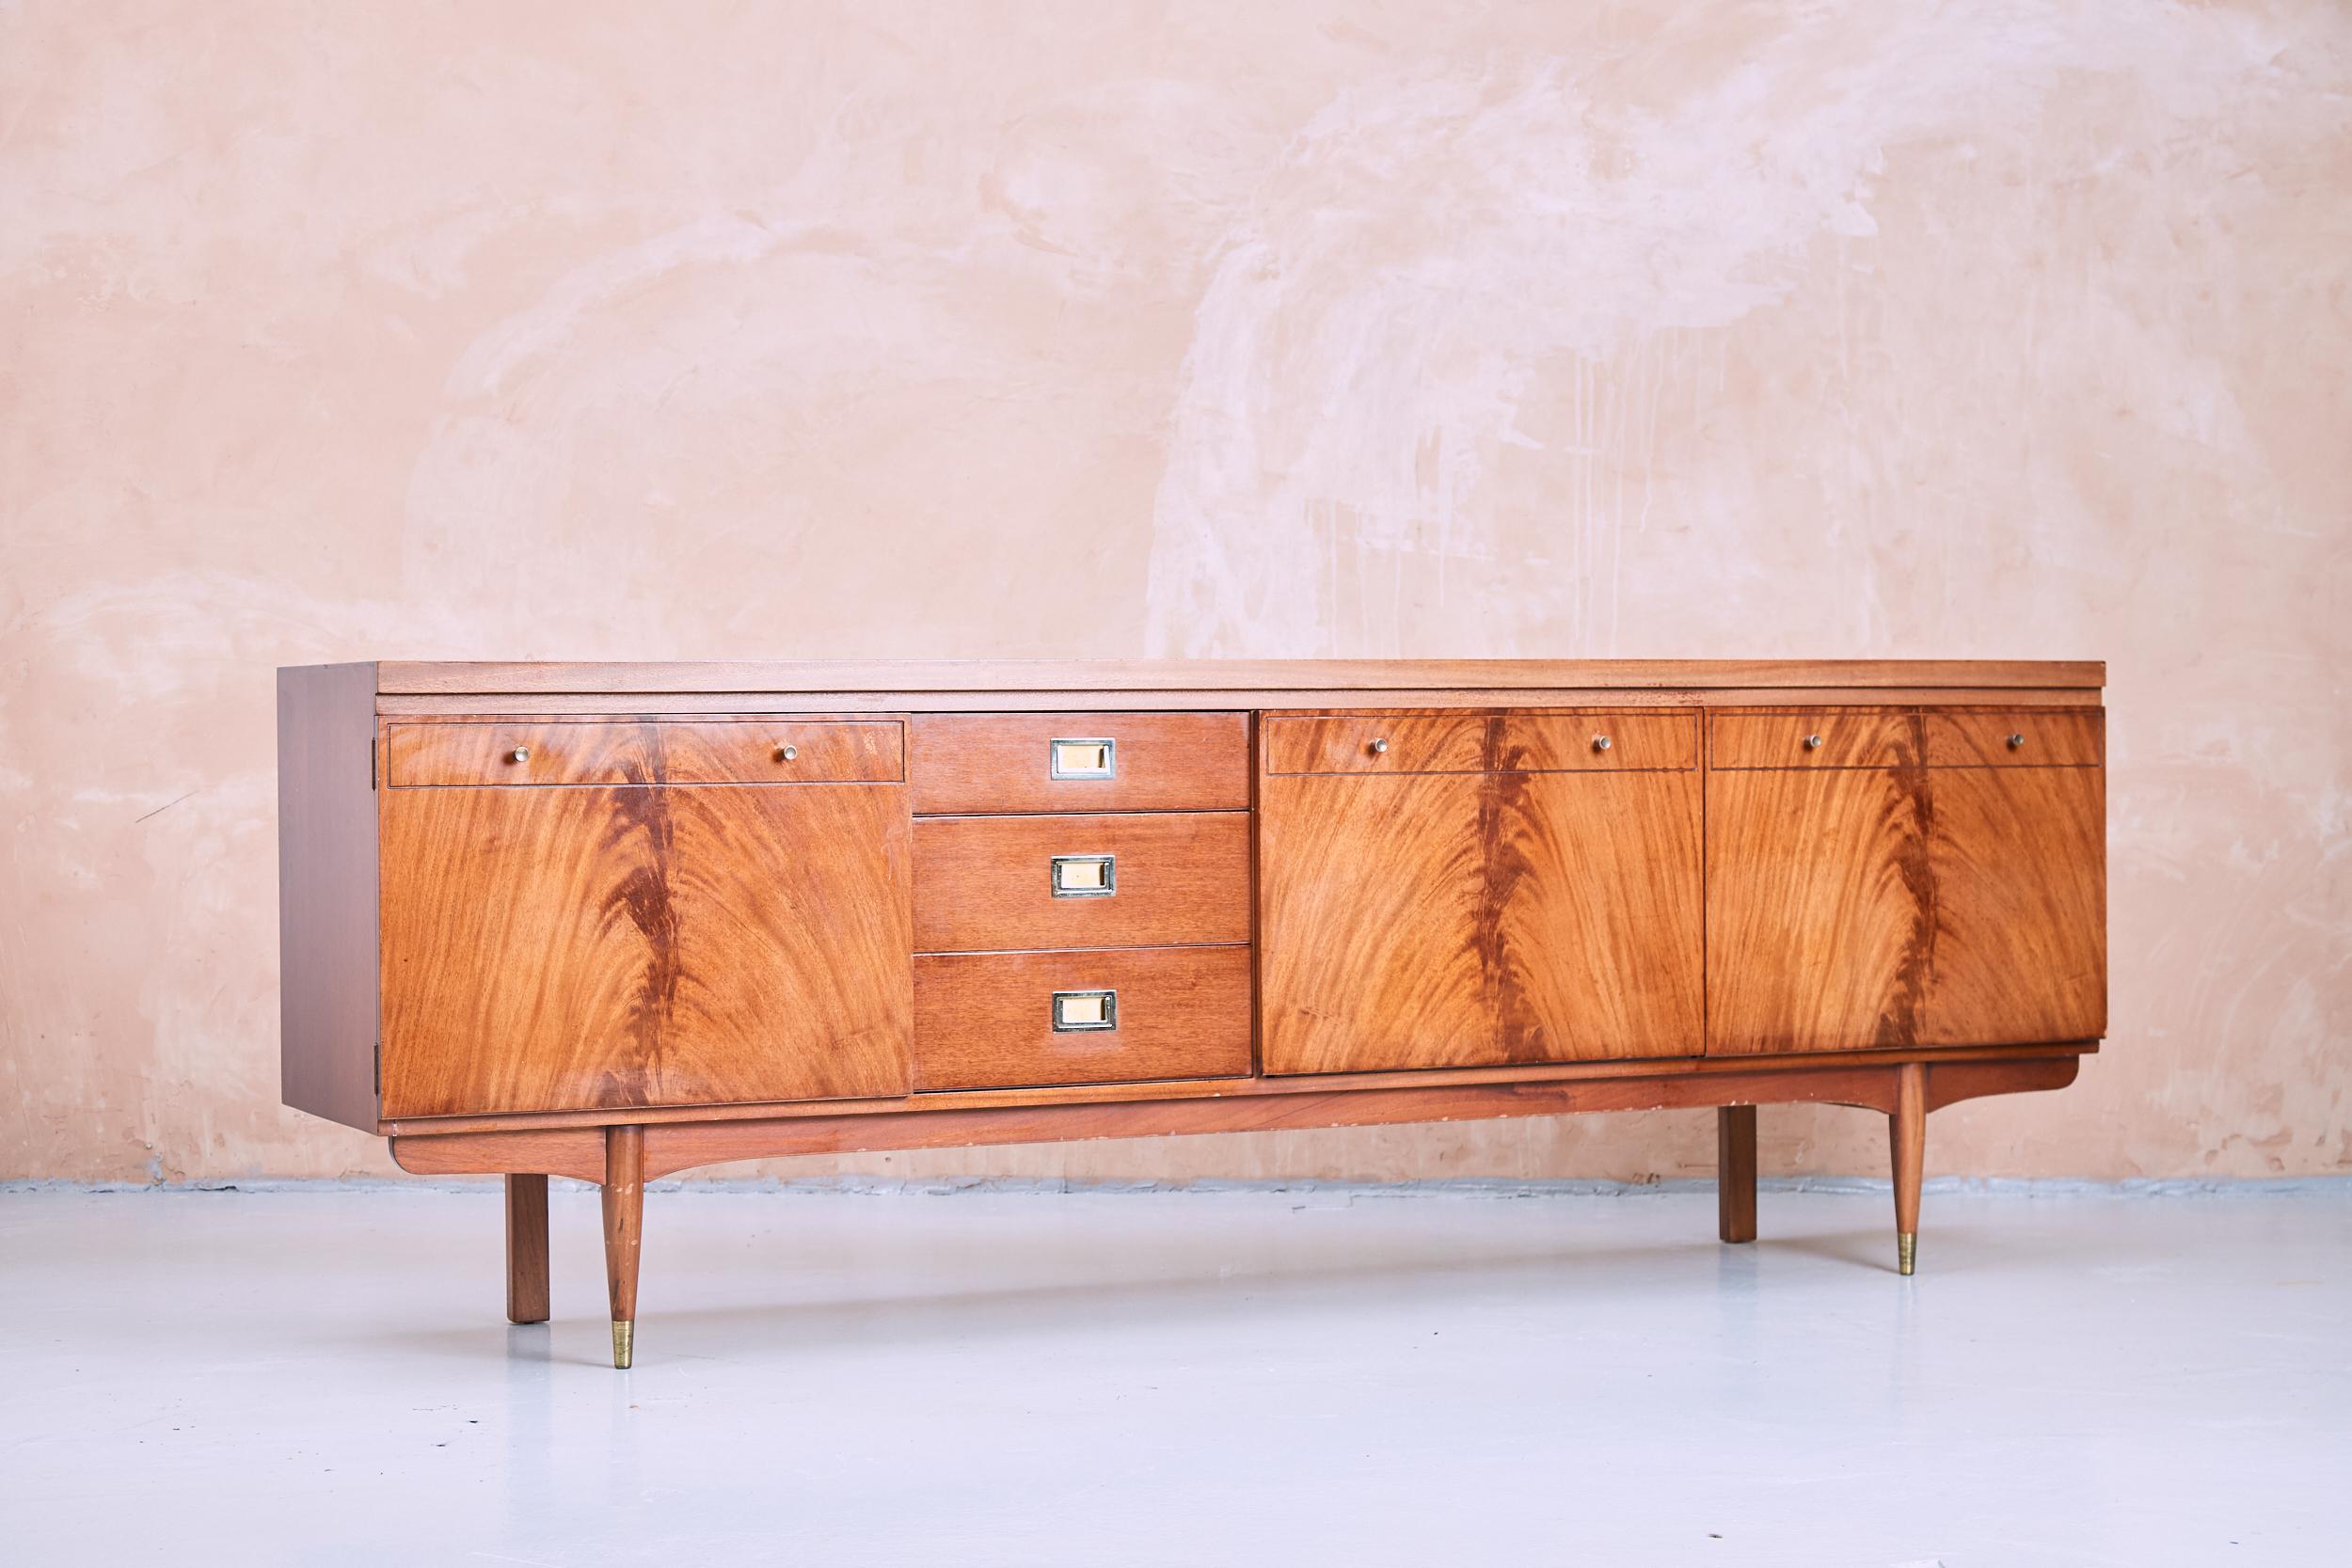 Stylish midcentury sideboard or server. Manufactured by Greaves & Thomas who were inspired by Danish furniture design in the mid-20th century. Handsome flame mahogany veneer exterior with a dark finish. Ample storage space with cabinets and dovetail